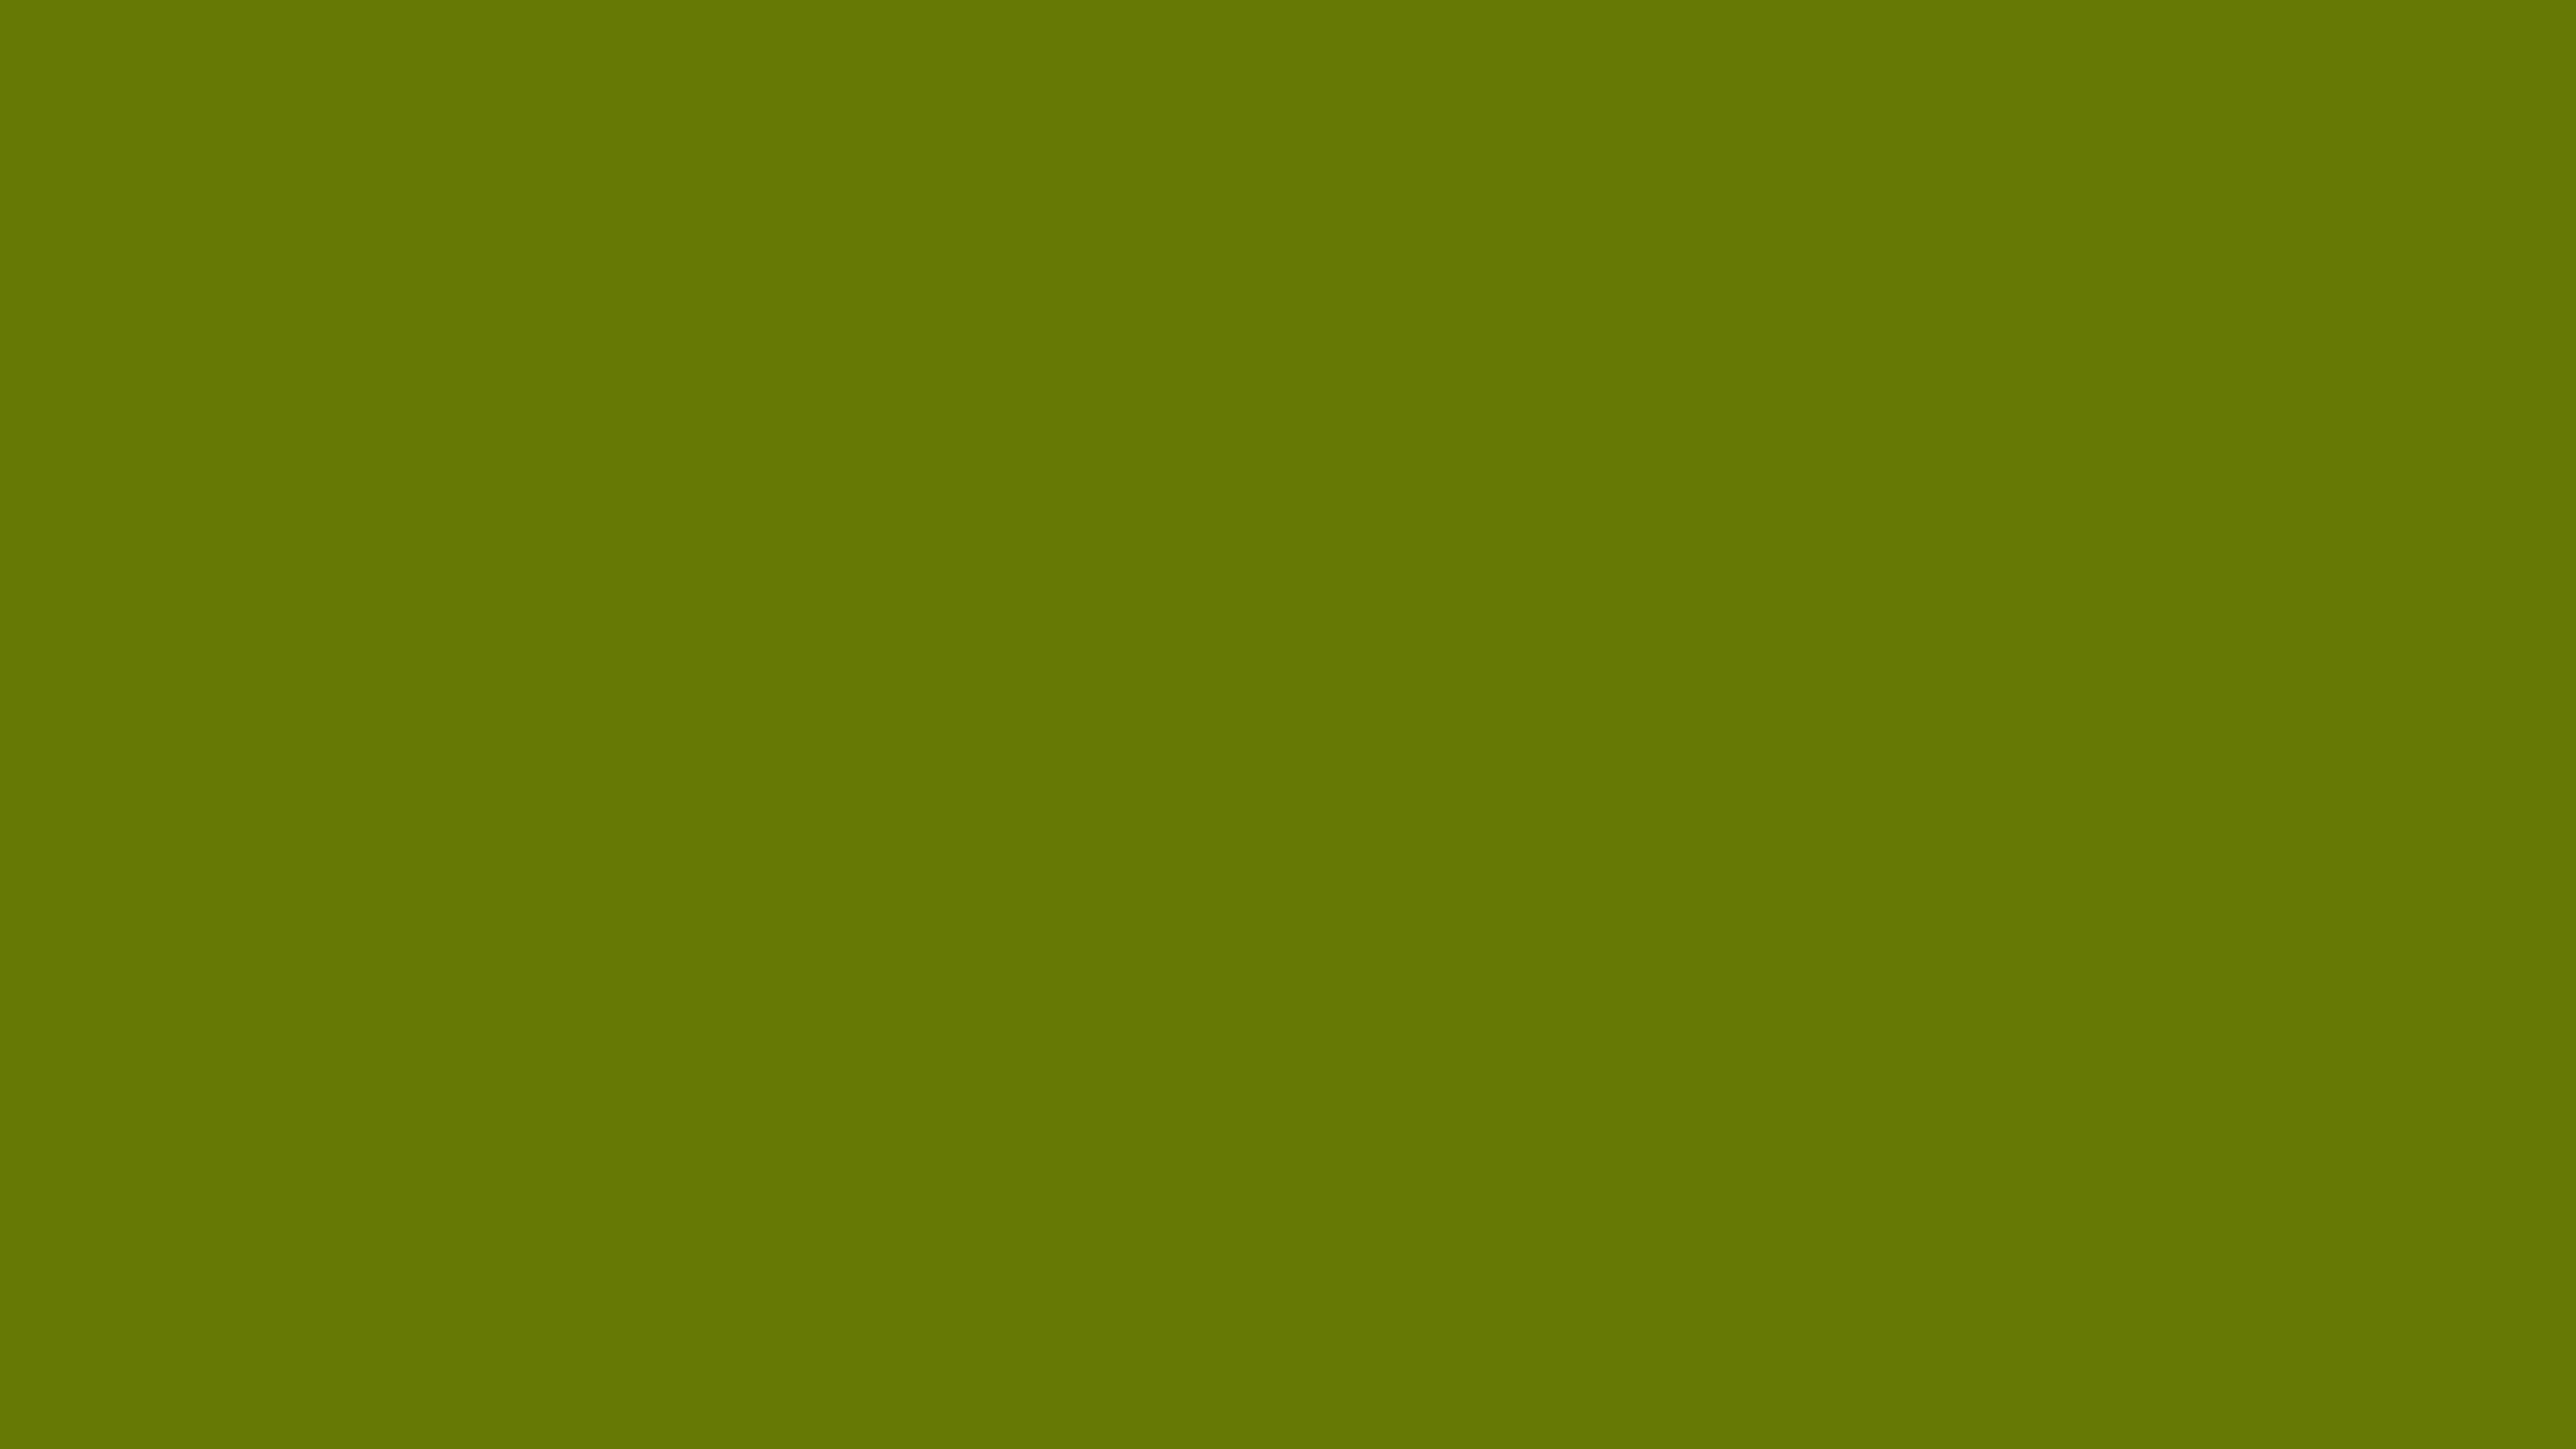 https://files.123freevectors.com/wp-content/solidbackground/olive-green-free-solidcolor-background.jpg